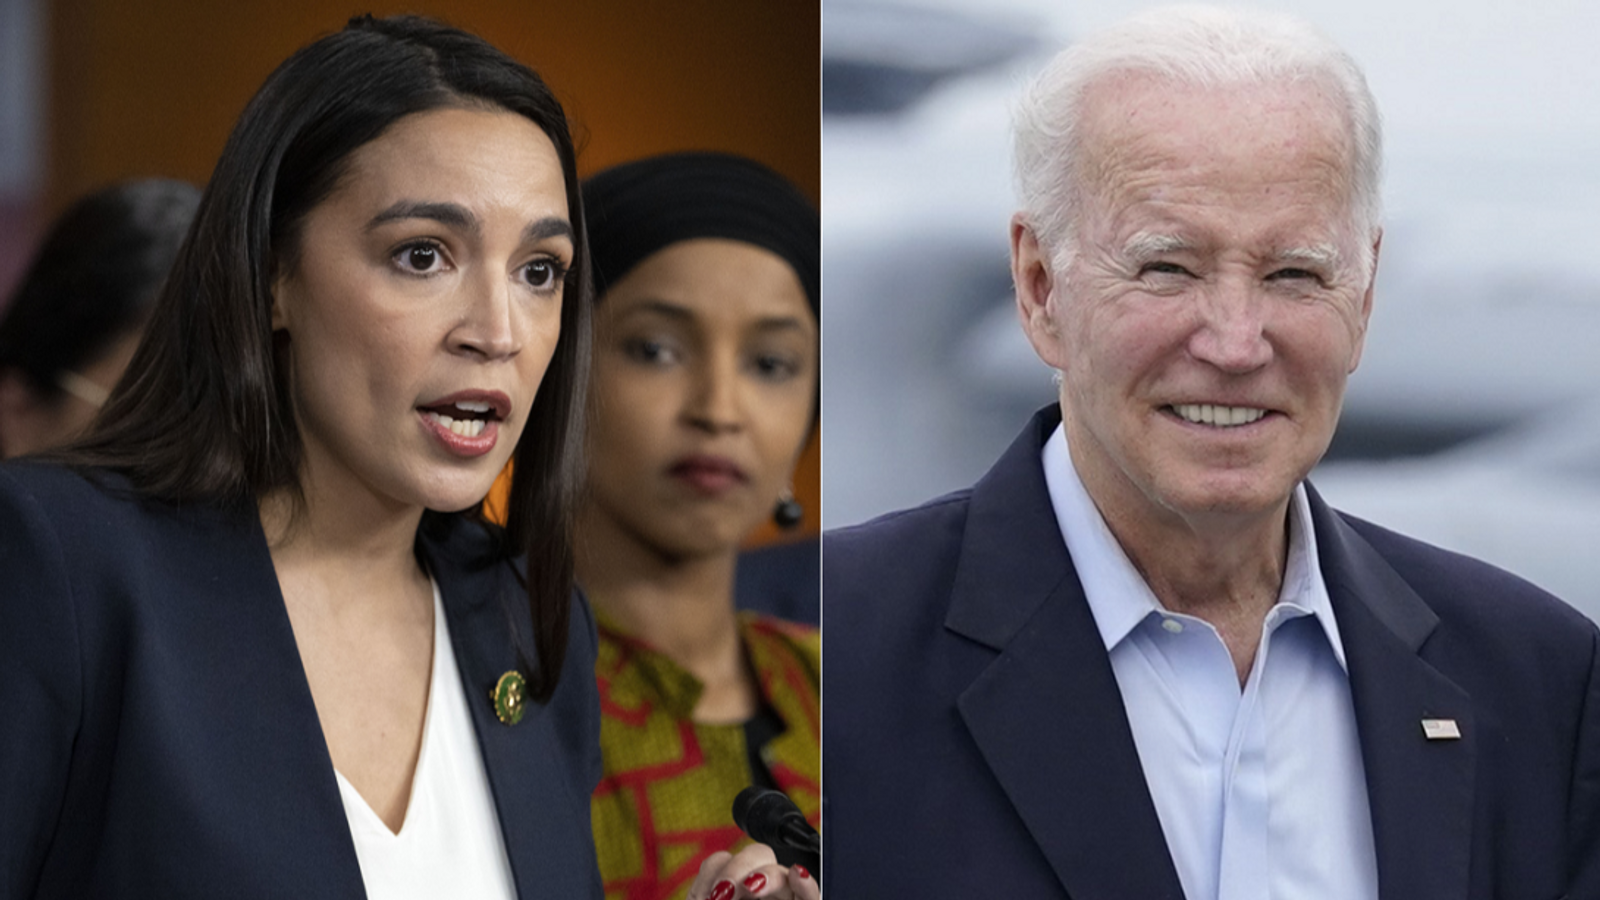 AOC: Bipartisan deals often 'underserve the communities that are